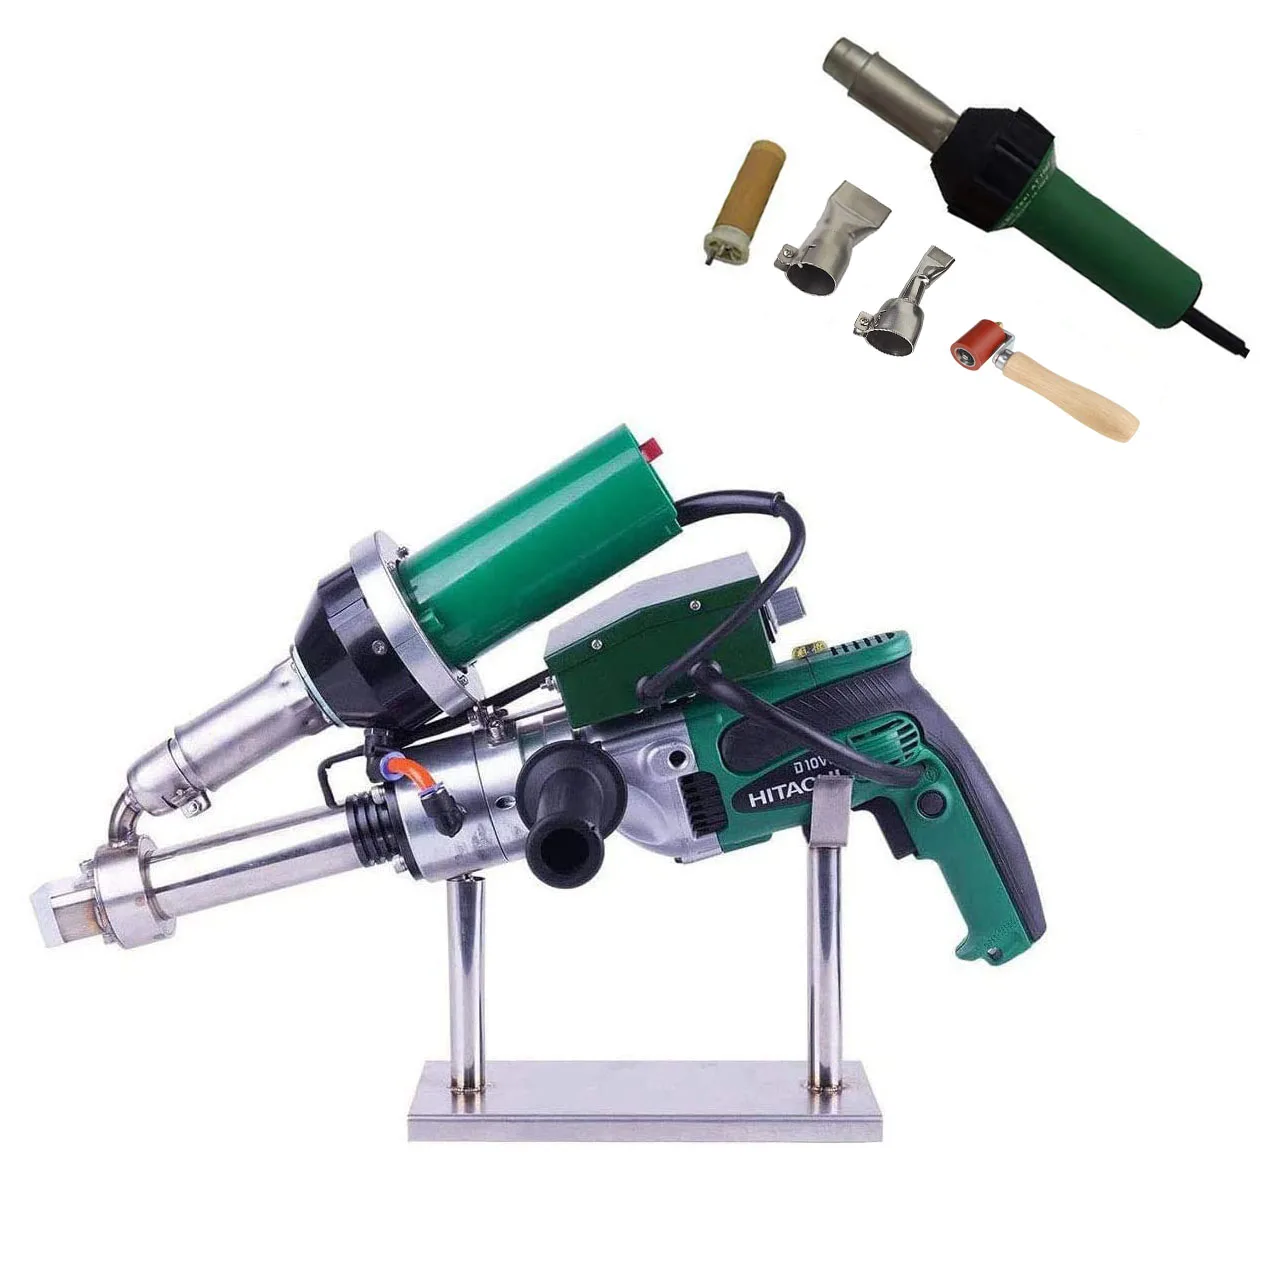 

Professional 1600W Plastic Extruder Welder Hand Extrusion Welding Machine with Heat Gun Kit for PVC PP HDPE LDPE Pipe Membrane